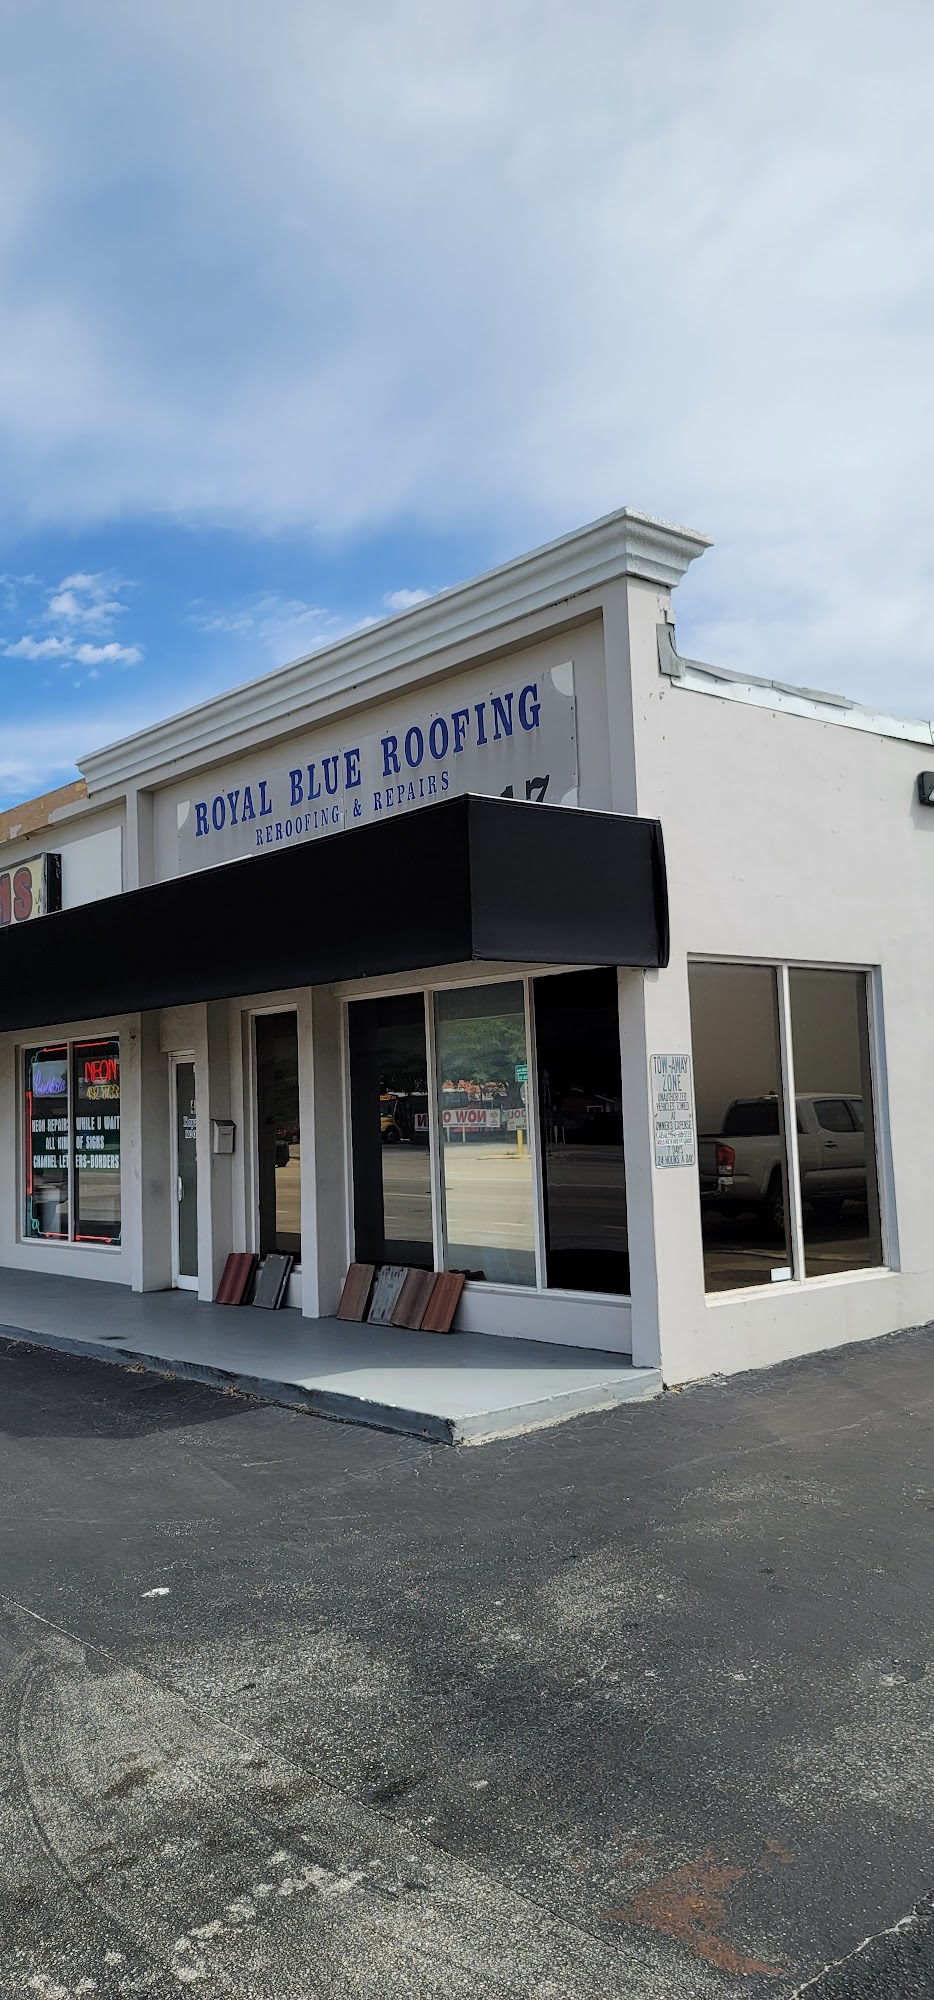 Royal Blue Roofing